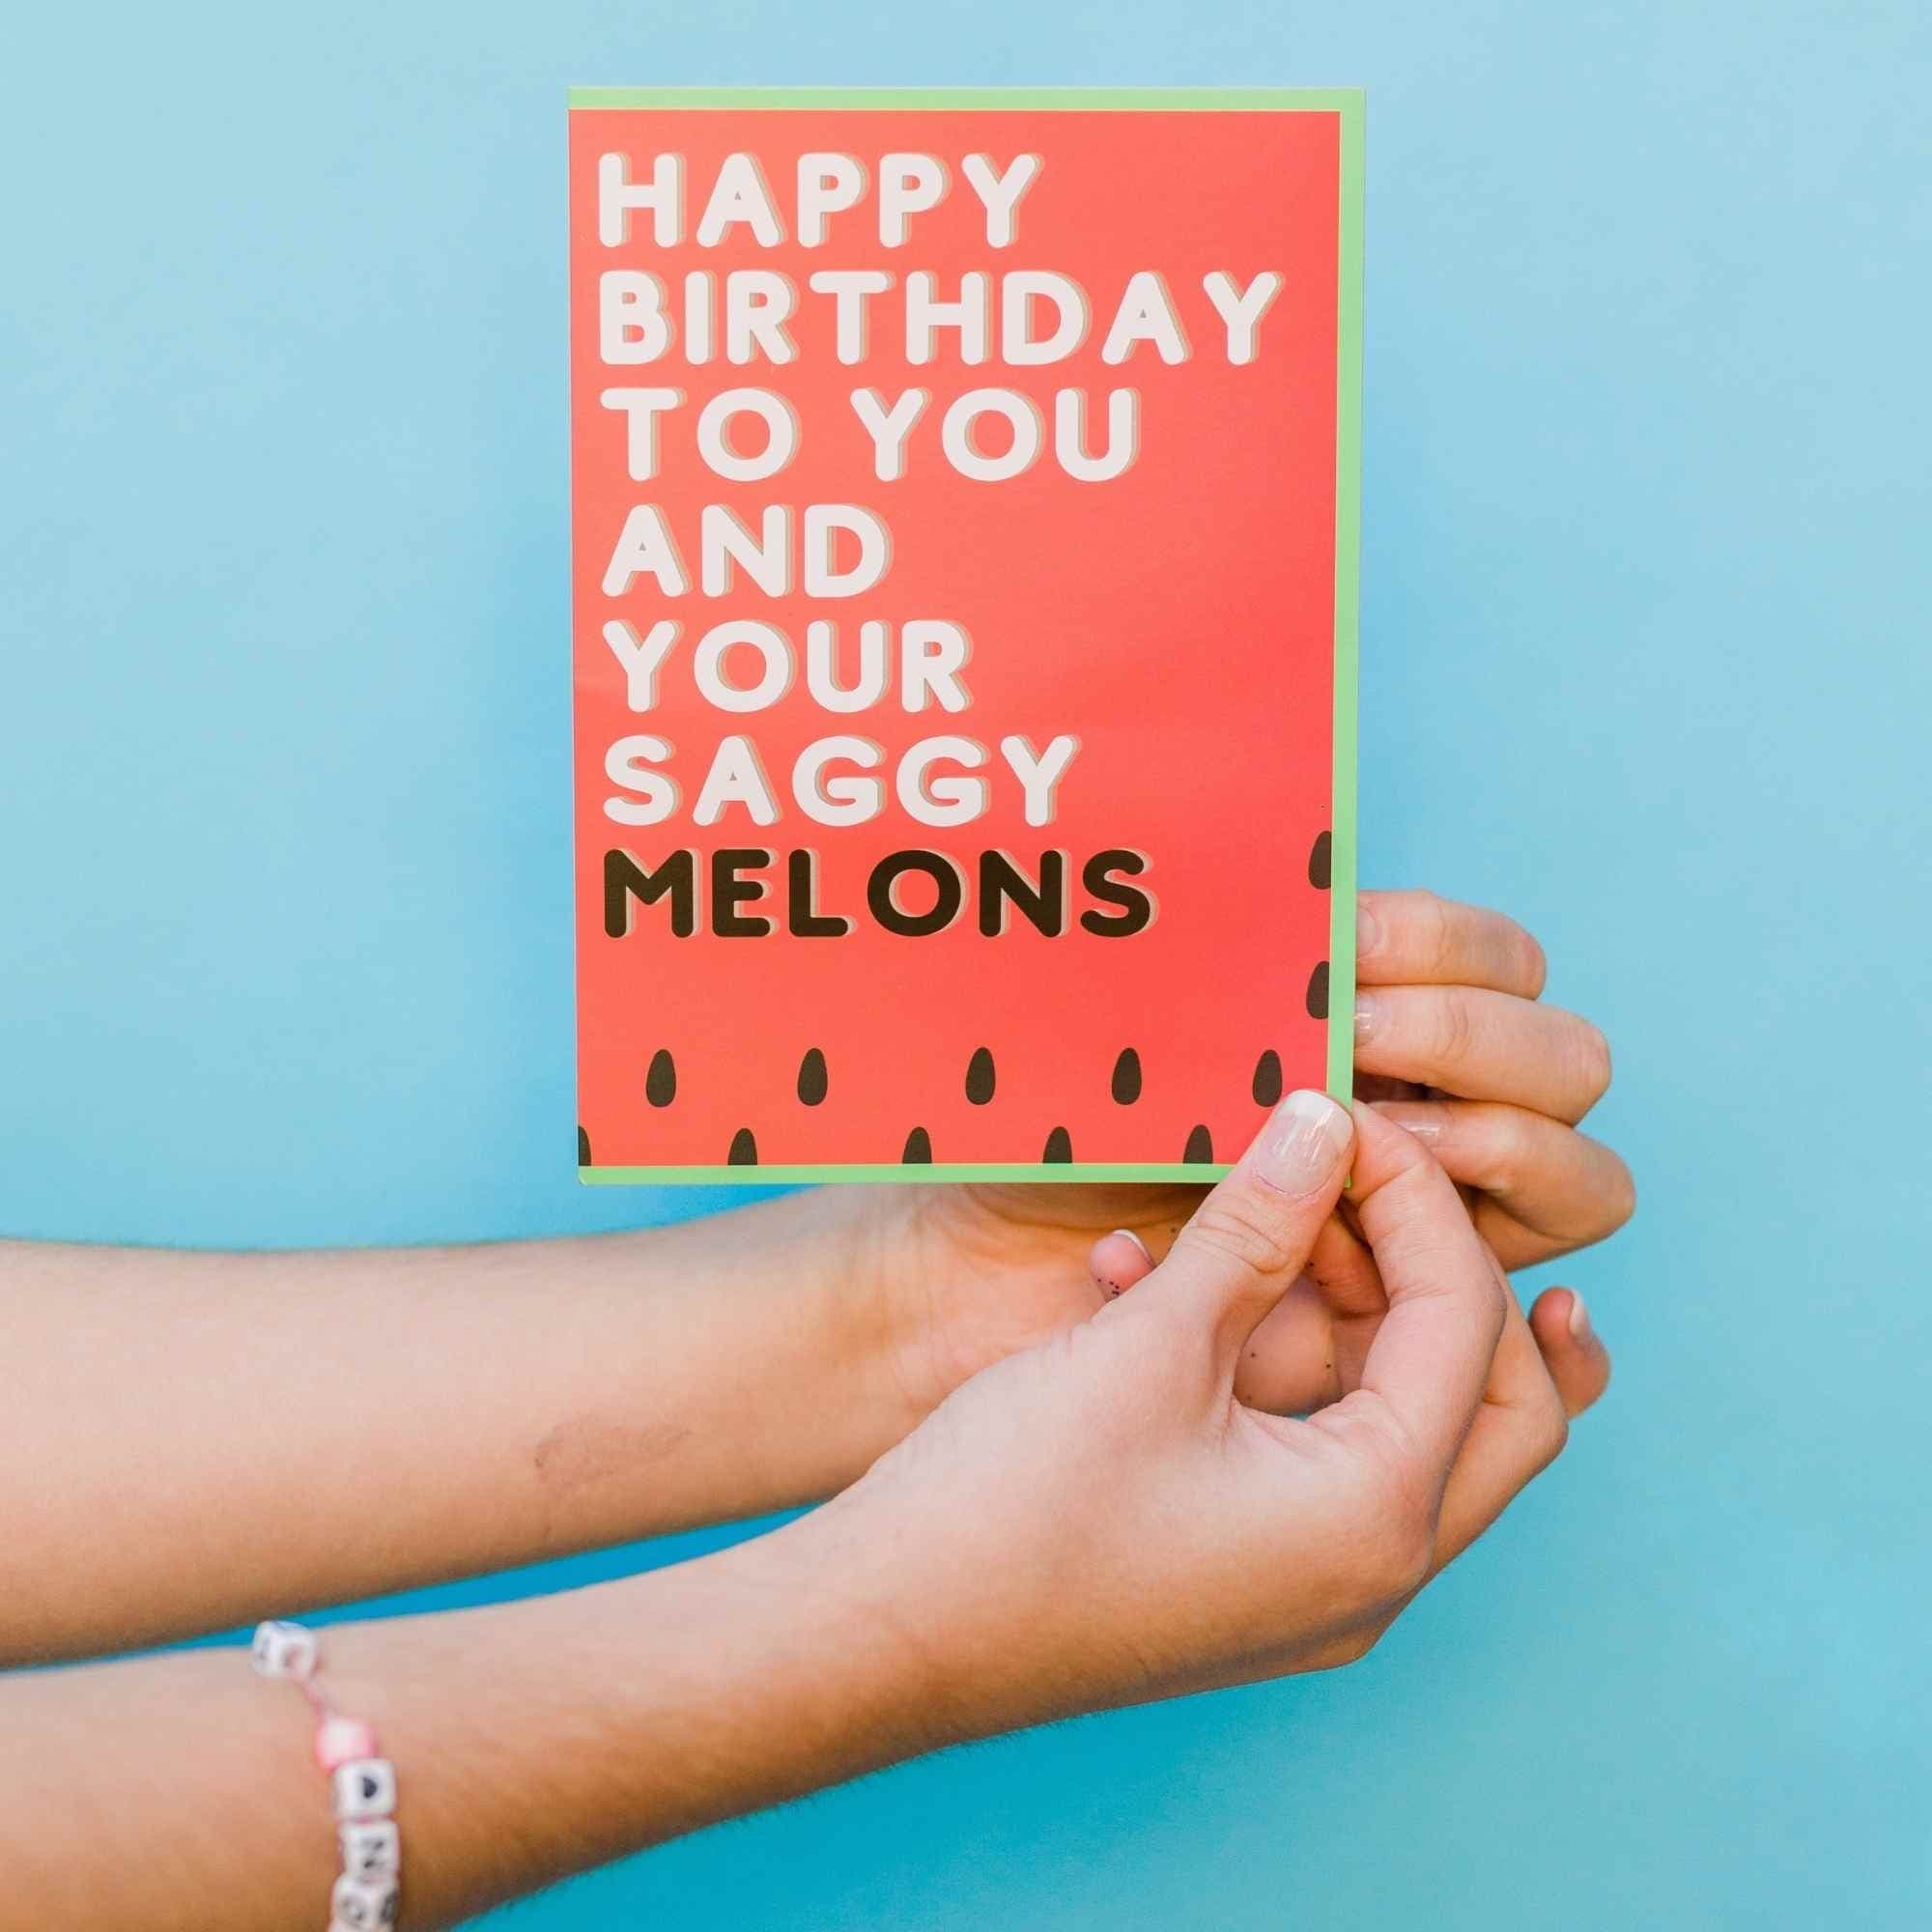 Happy Birthday to You and Your Saggy Melons! - Glitter Bomb Card - DickAtYourDoor